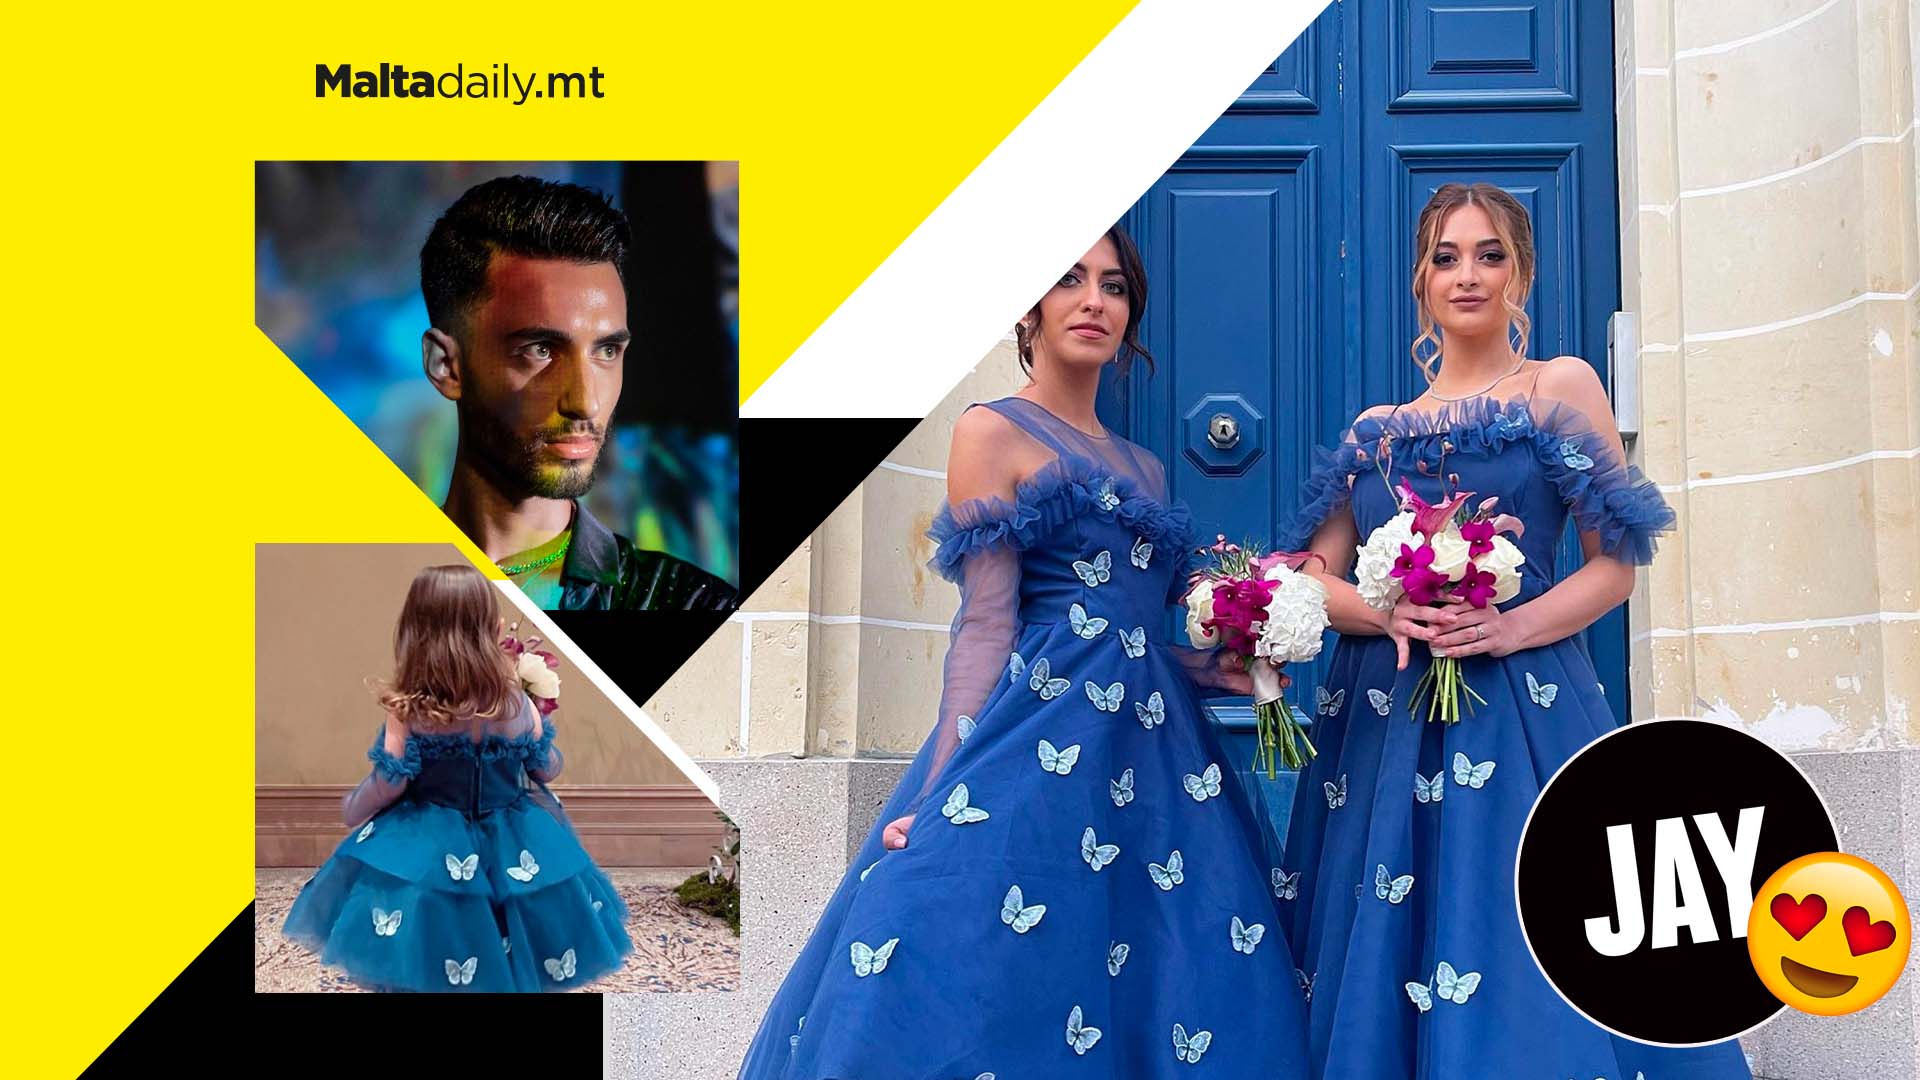 One of Malta’s most promising fashion designers joined the wedding scene